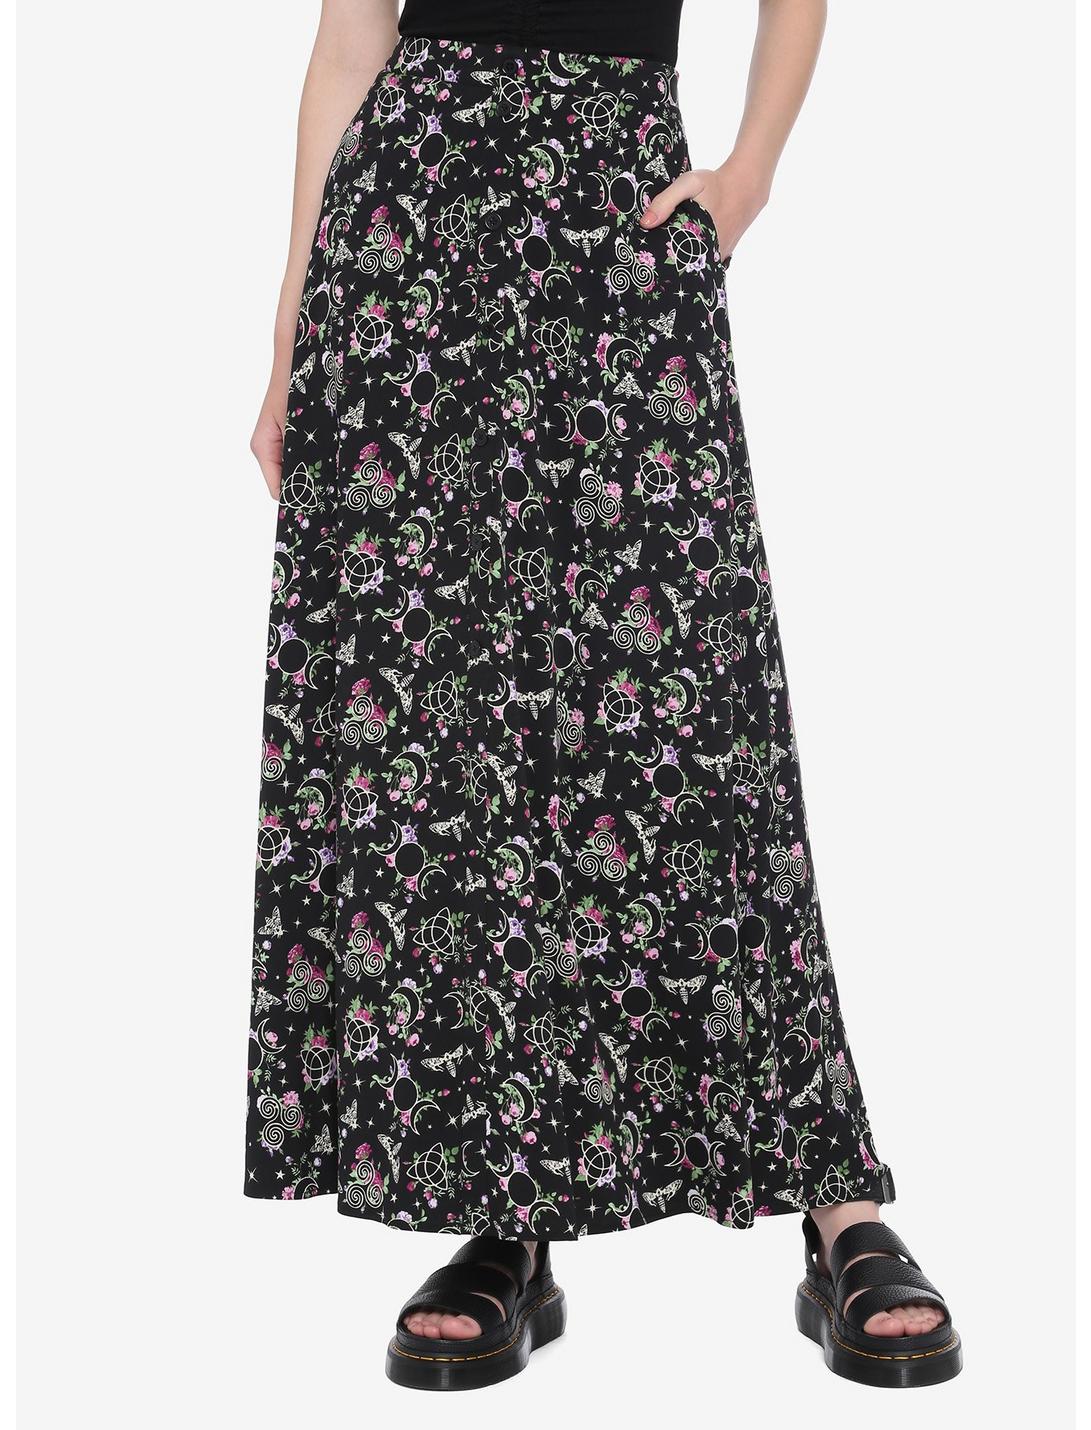 Witchy Floral Maxi Skirt, MULTI, hi-res